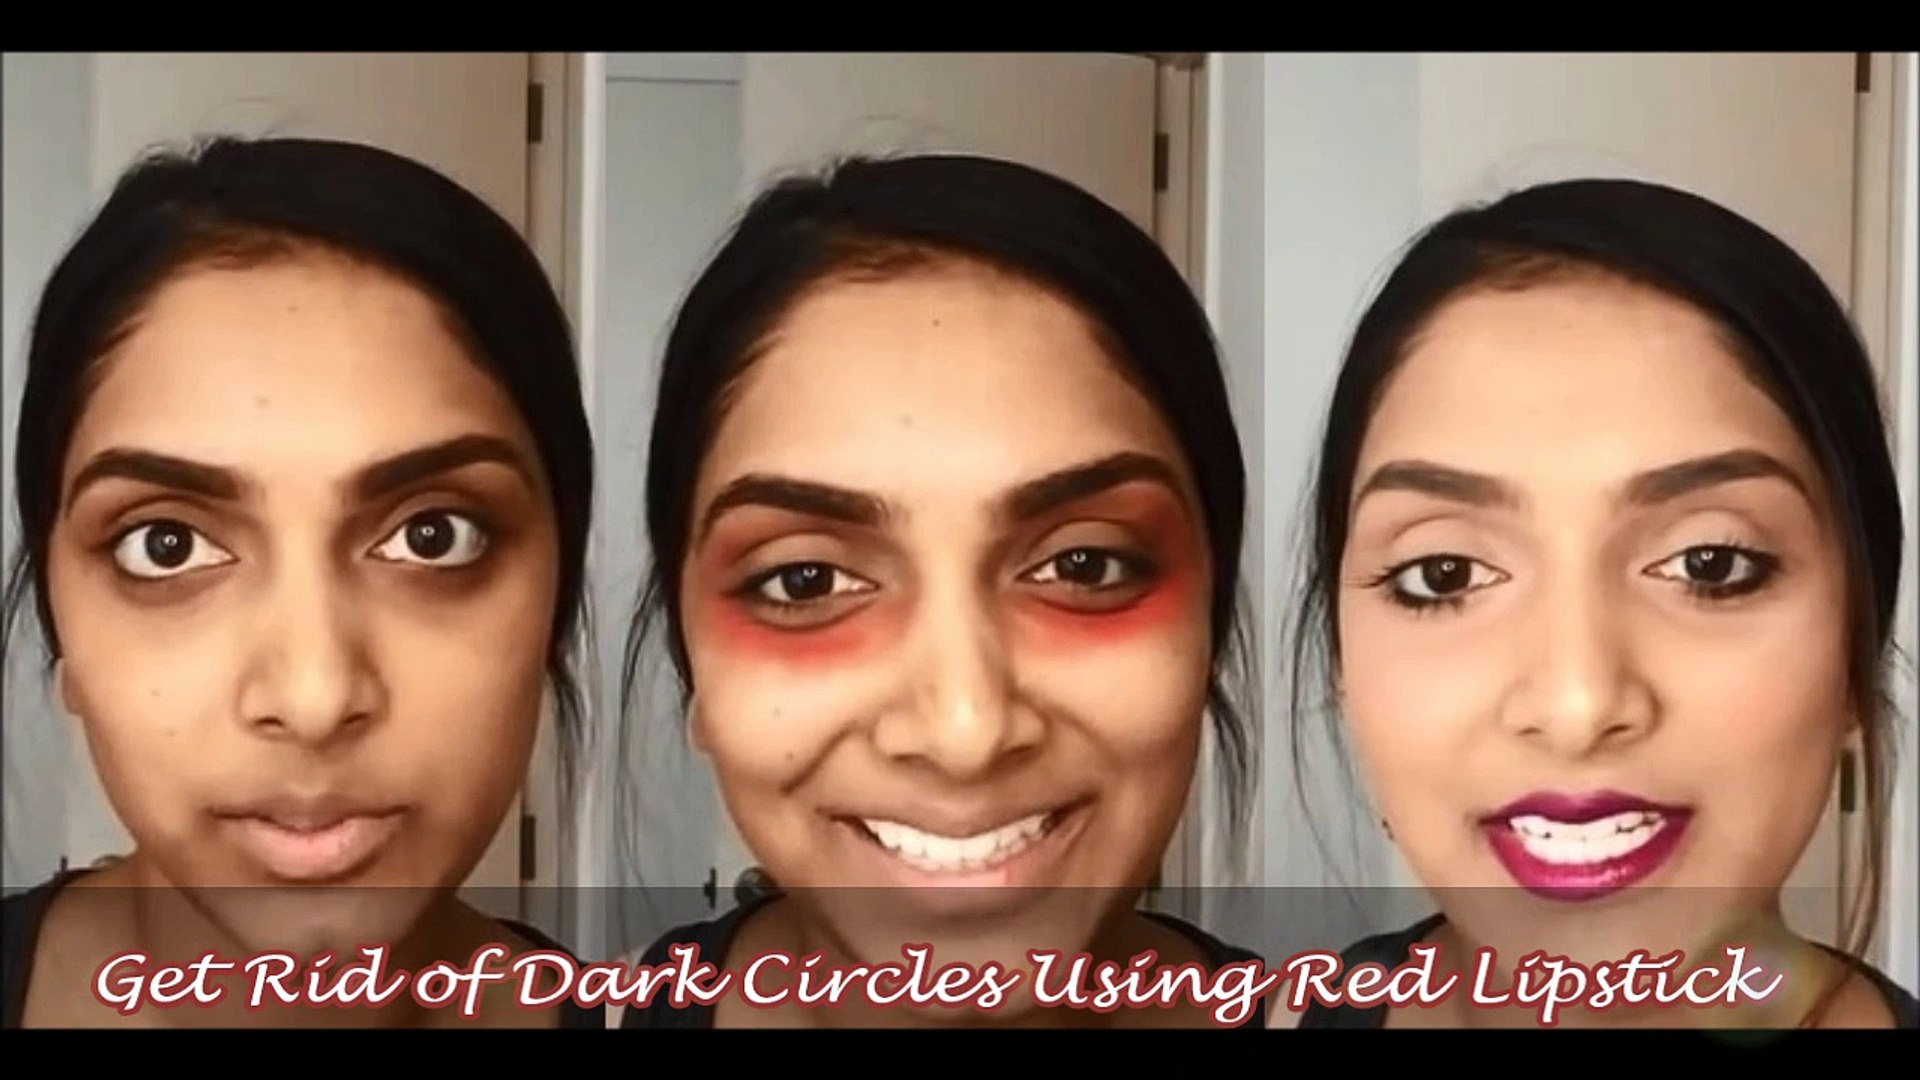 Dark Circles Using Red Lipstick by Deepicam - Dailymotion